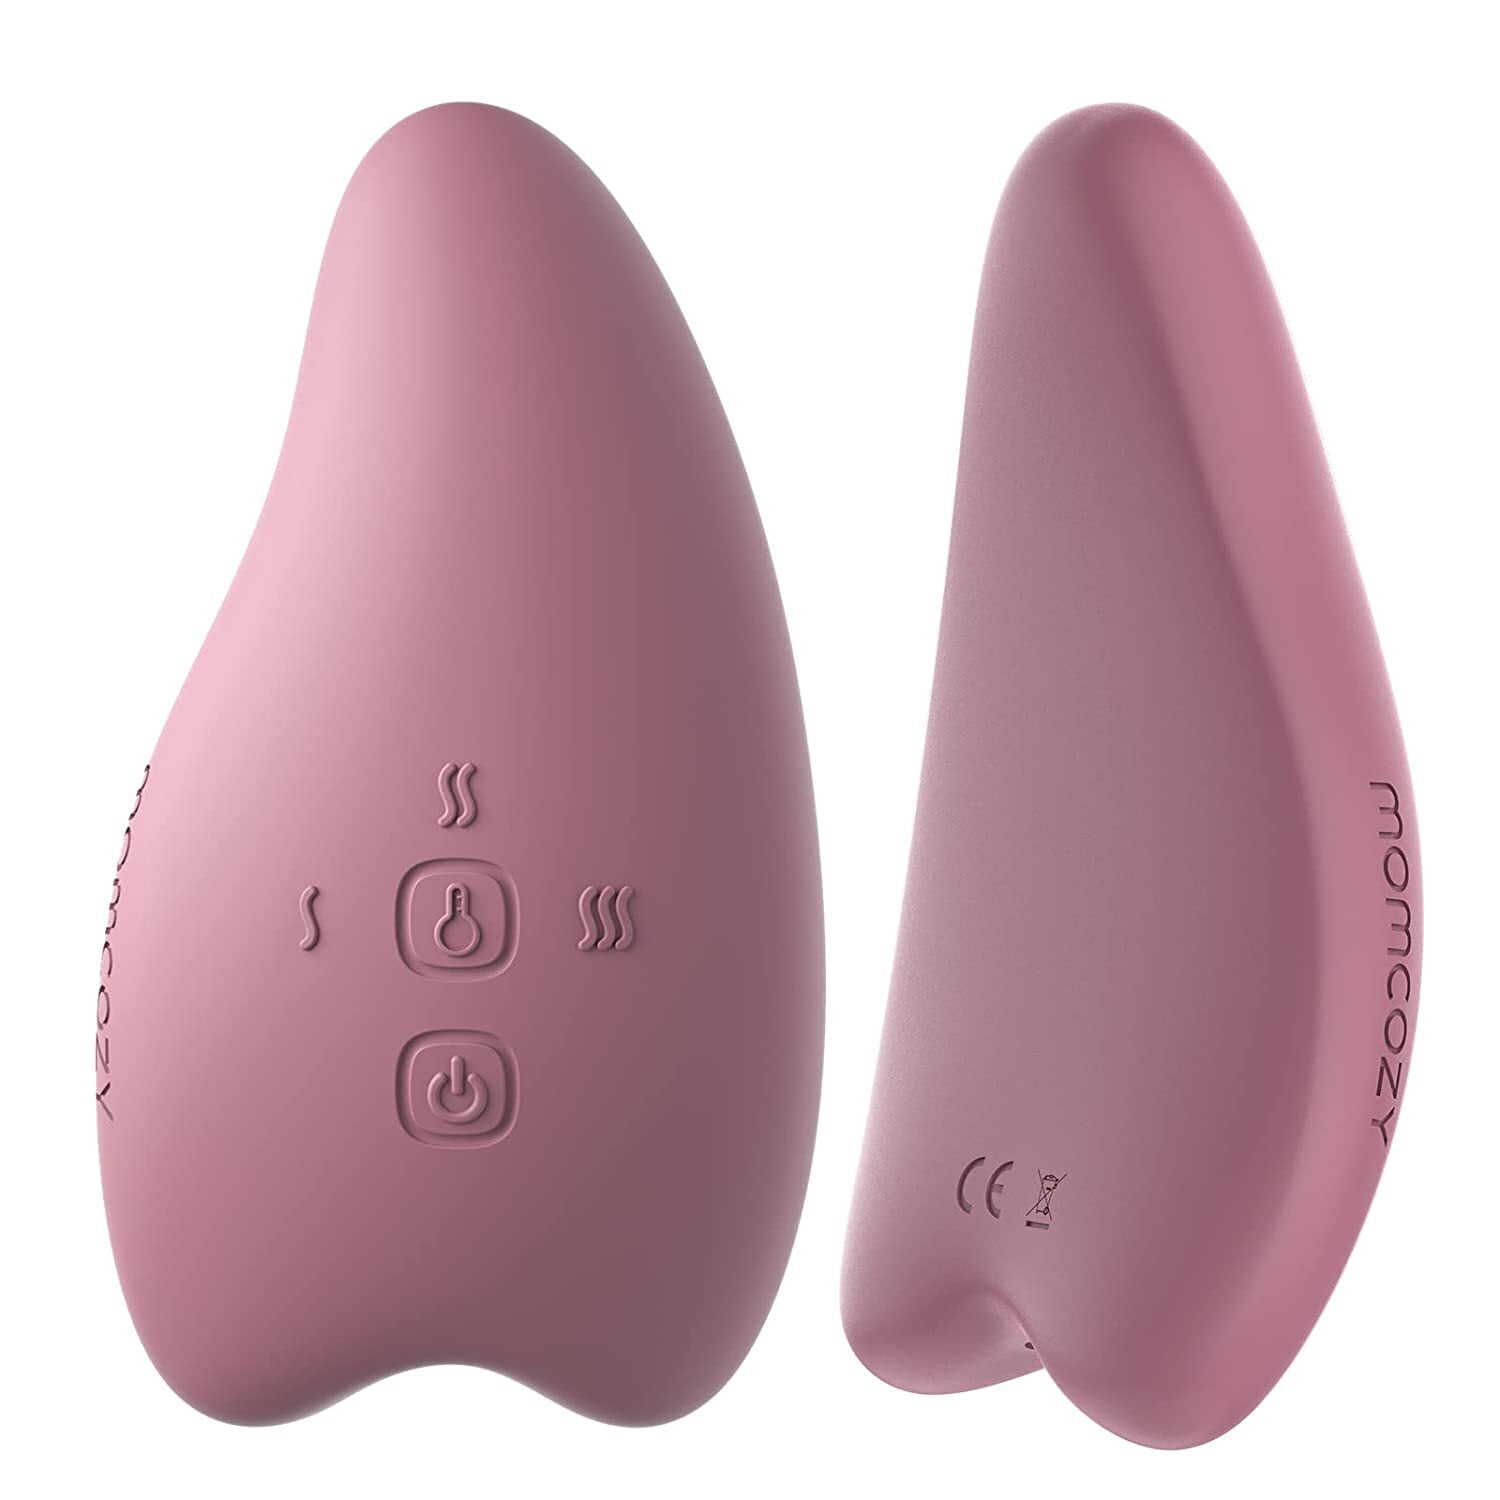 Silicone Lactation Massager Comfortable Breast Massager 9